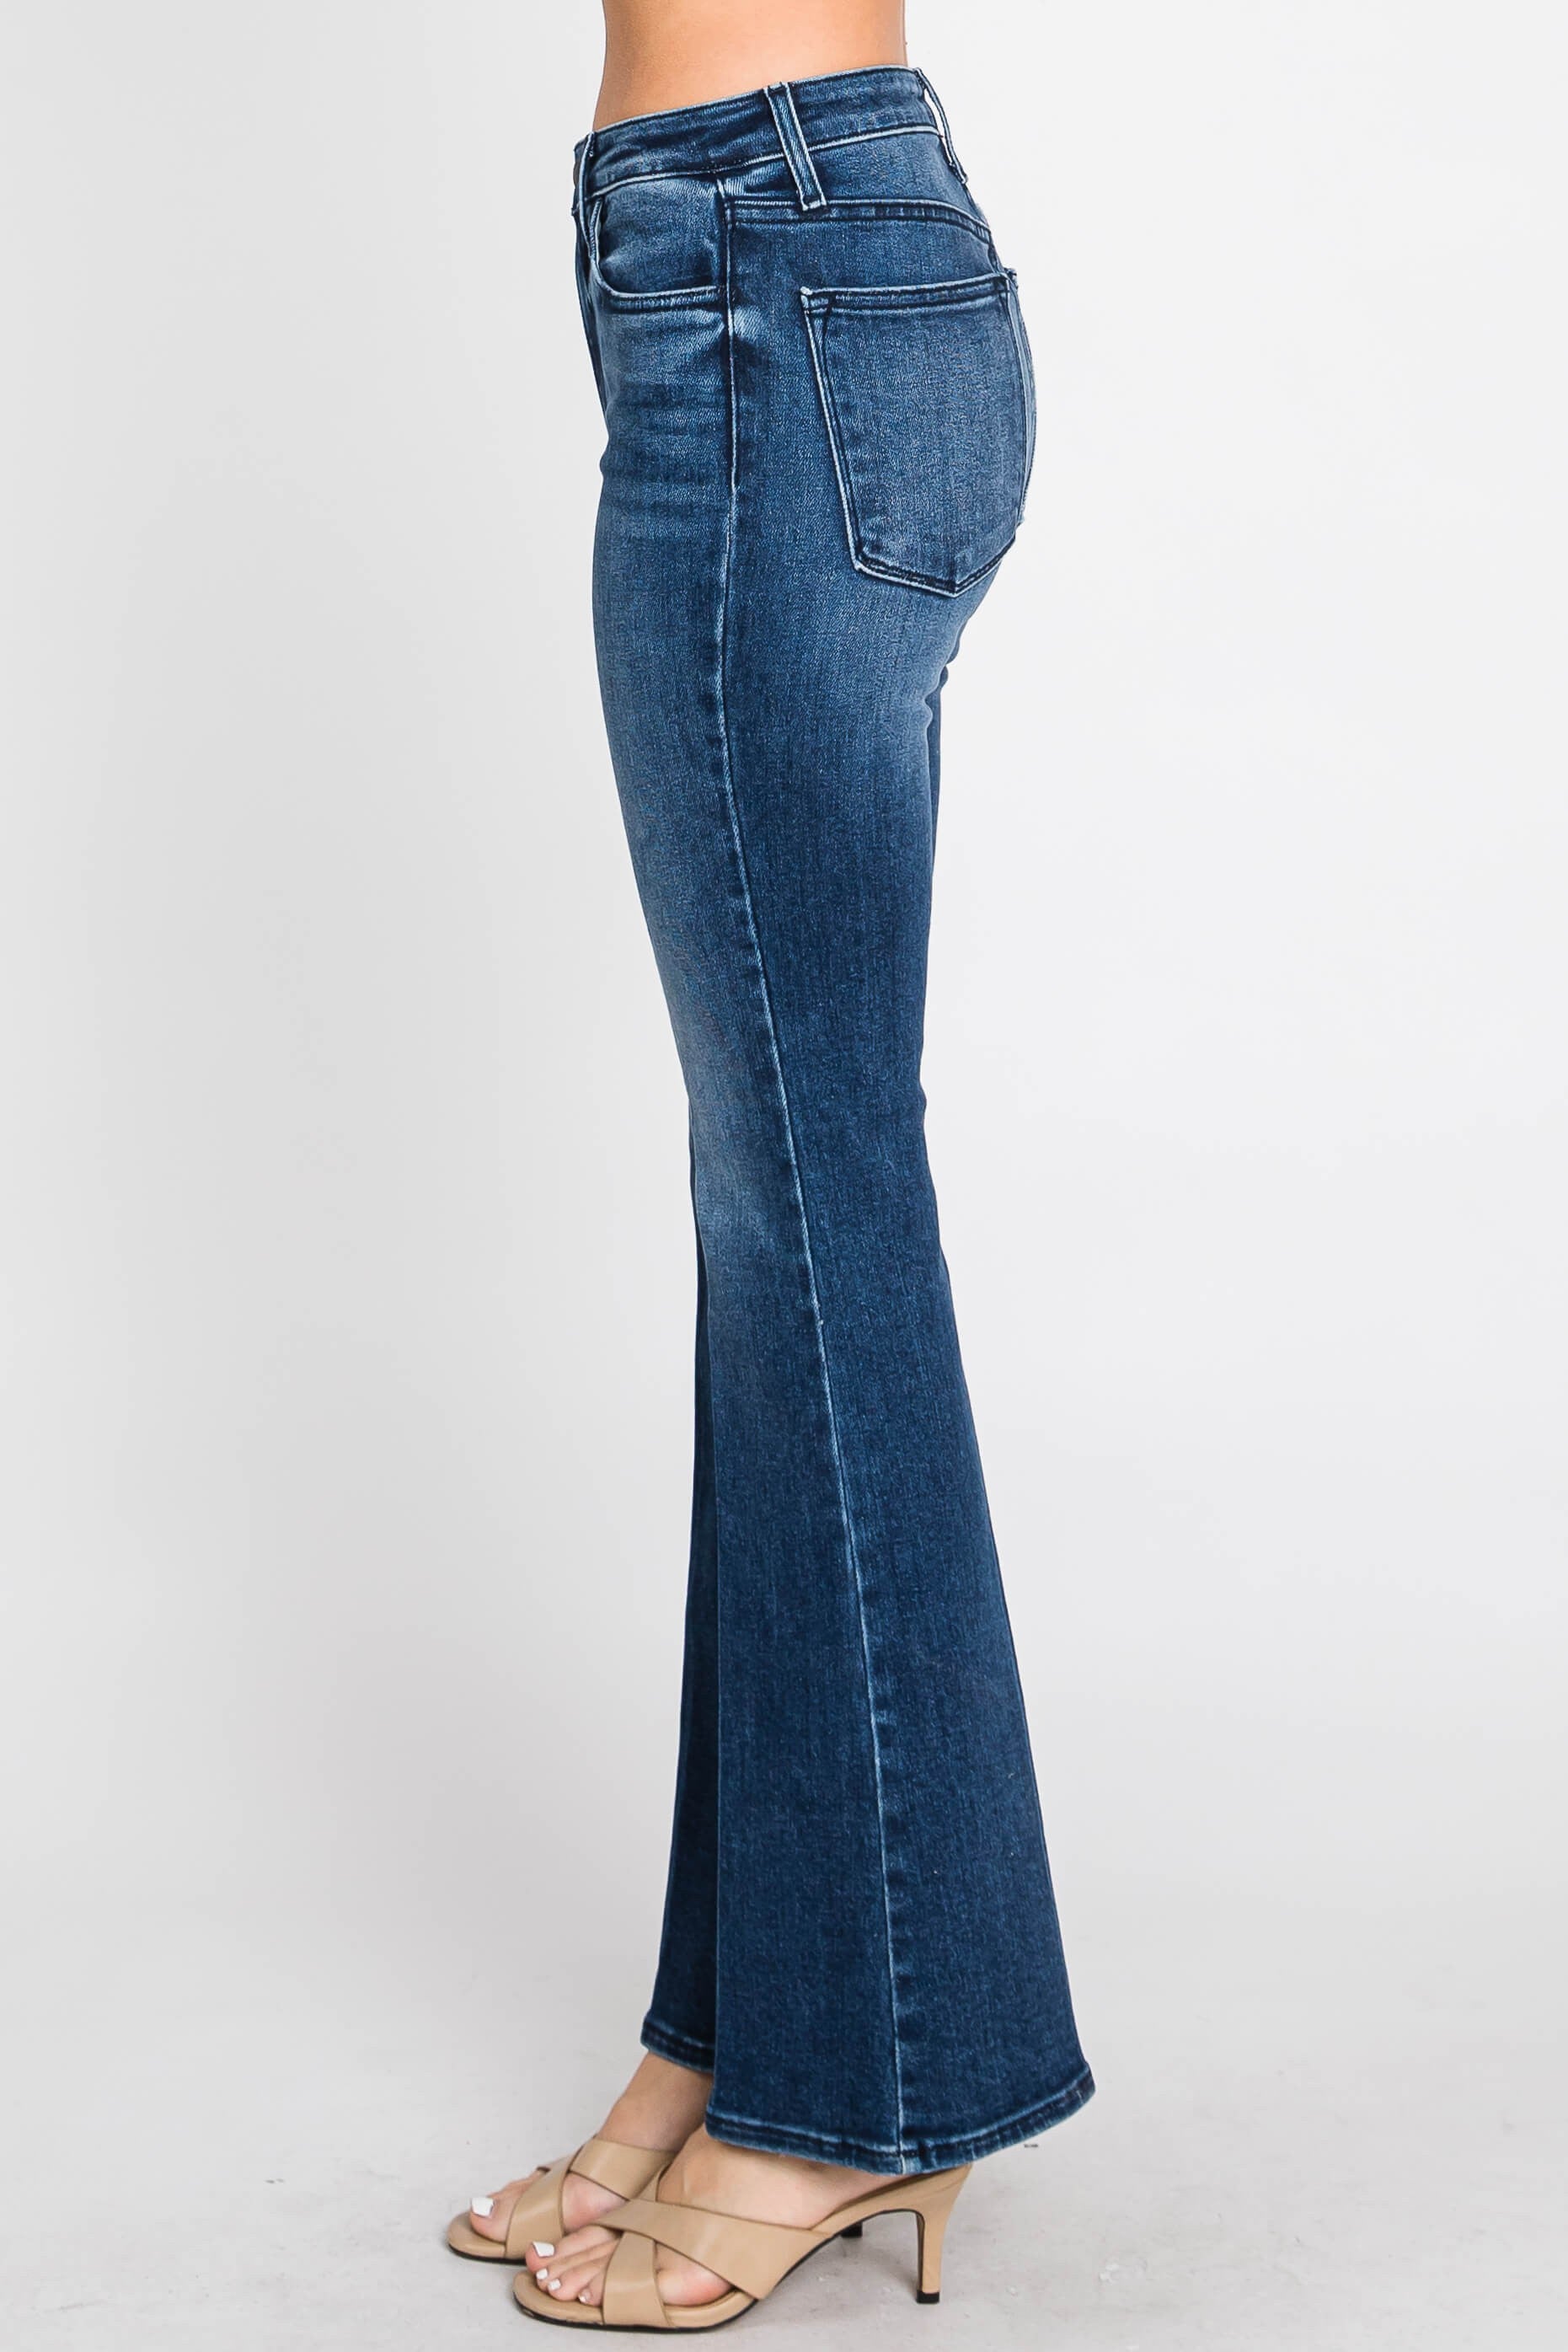 The Bella Bootcut Jeans by L.T.J